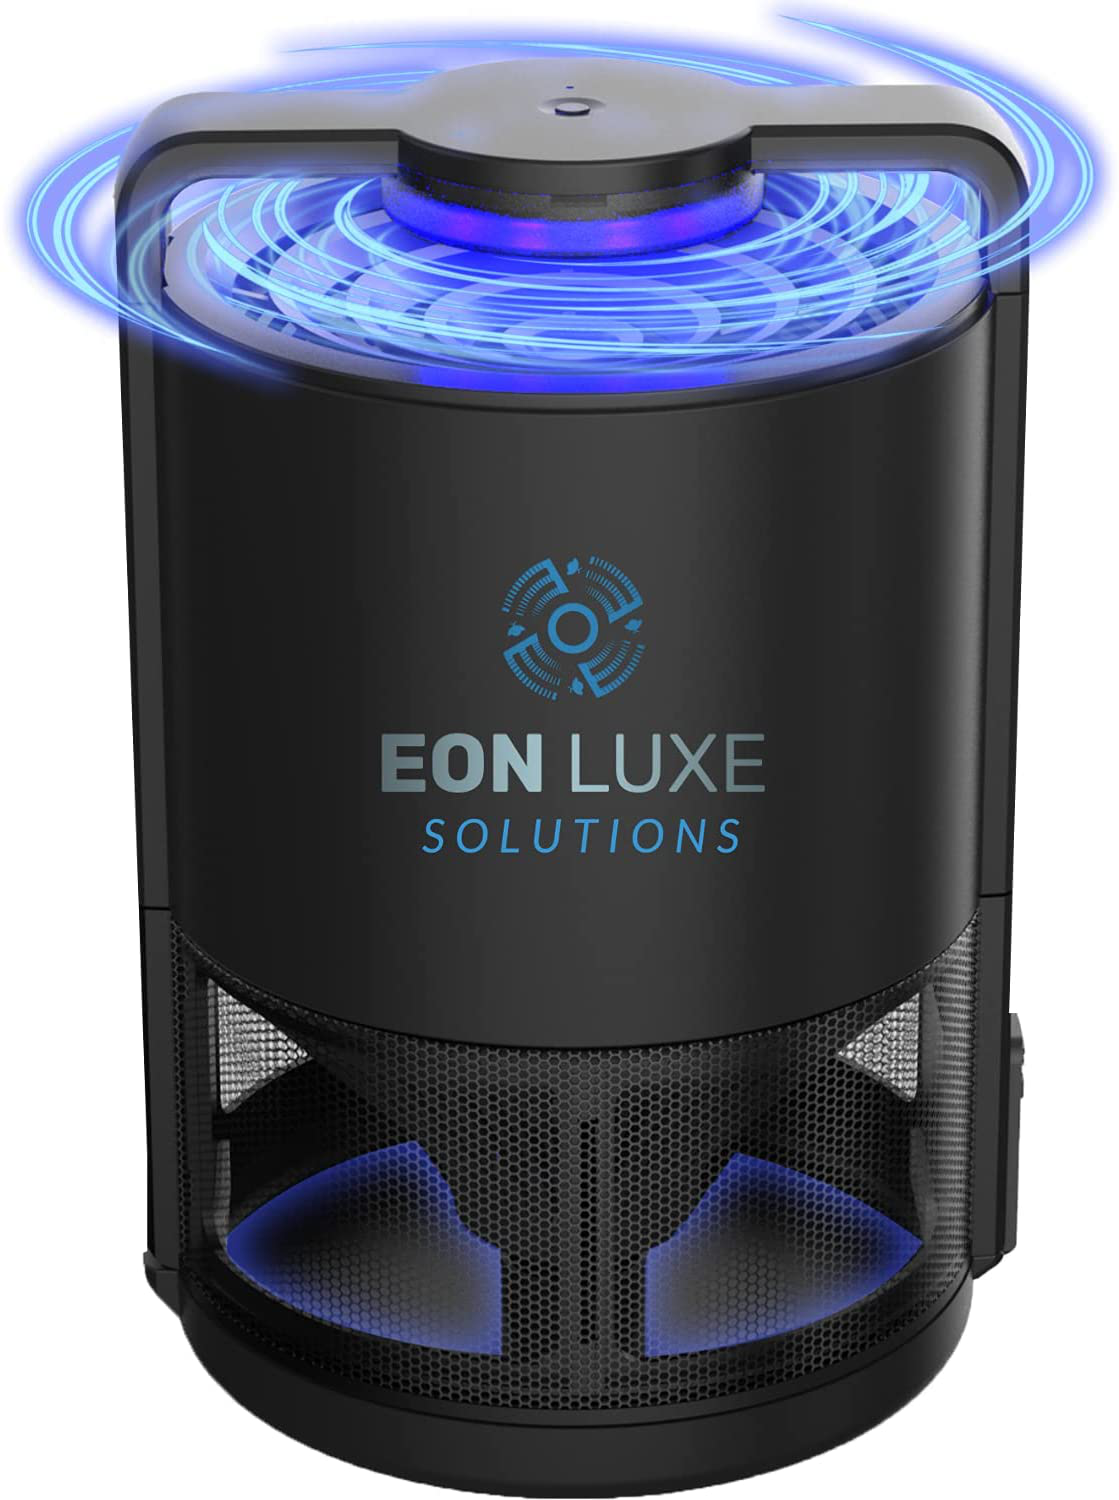 Eon Luxe Solutions Indoor Mosquito Killer & Fruit Fly Trap - NO ZAPPING NONTOXIC - Also Traps Gnats, Drain Flies, Mosquito, Insect Killer - Indoor Kitchen Bug Catcher